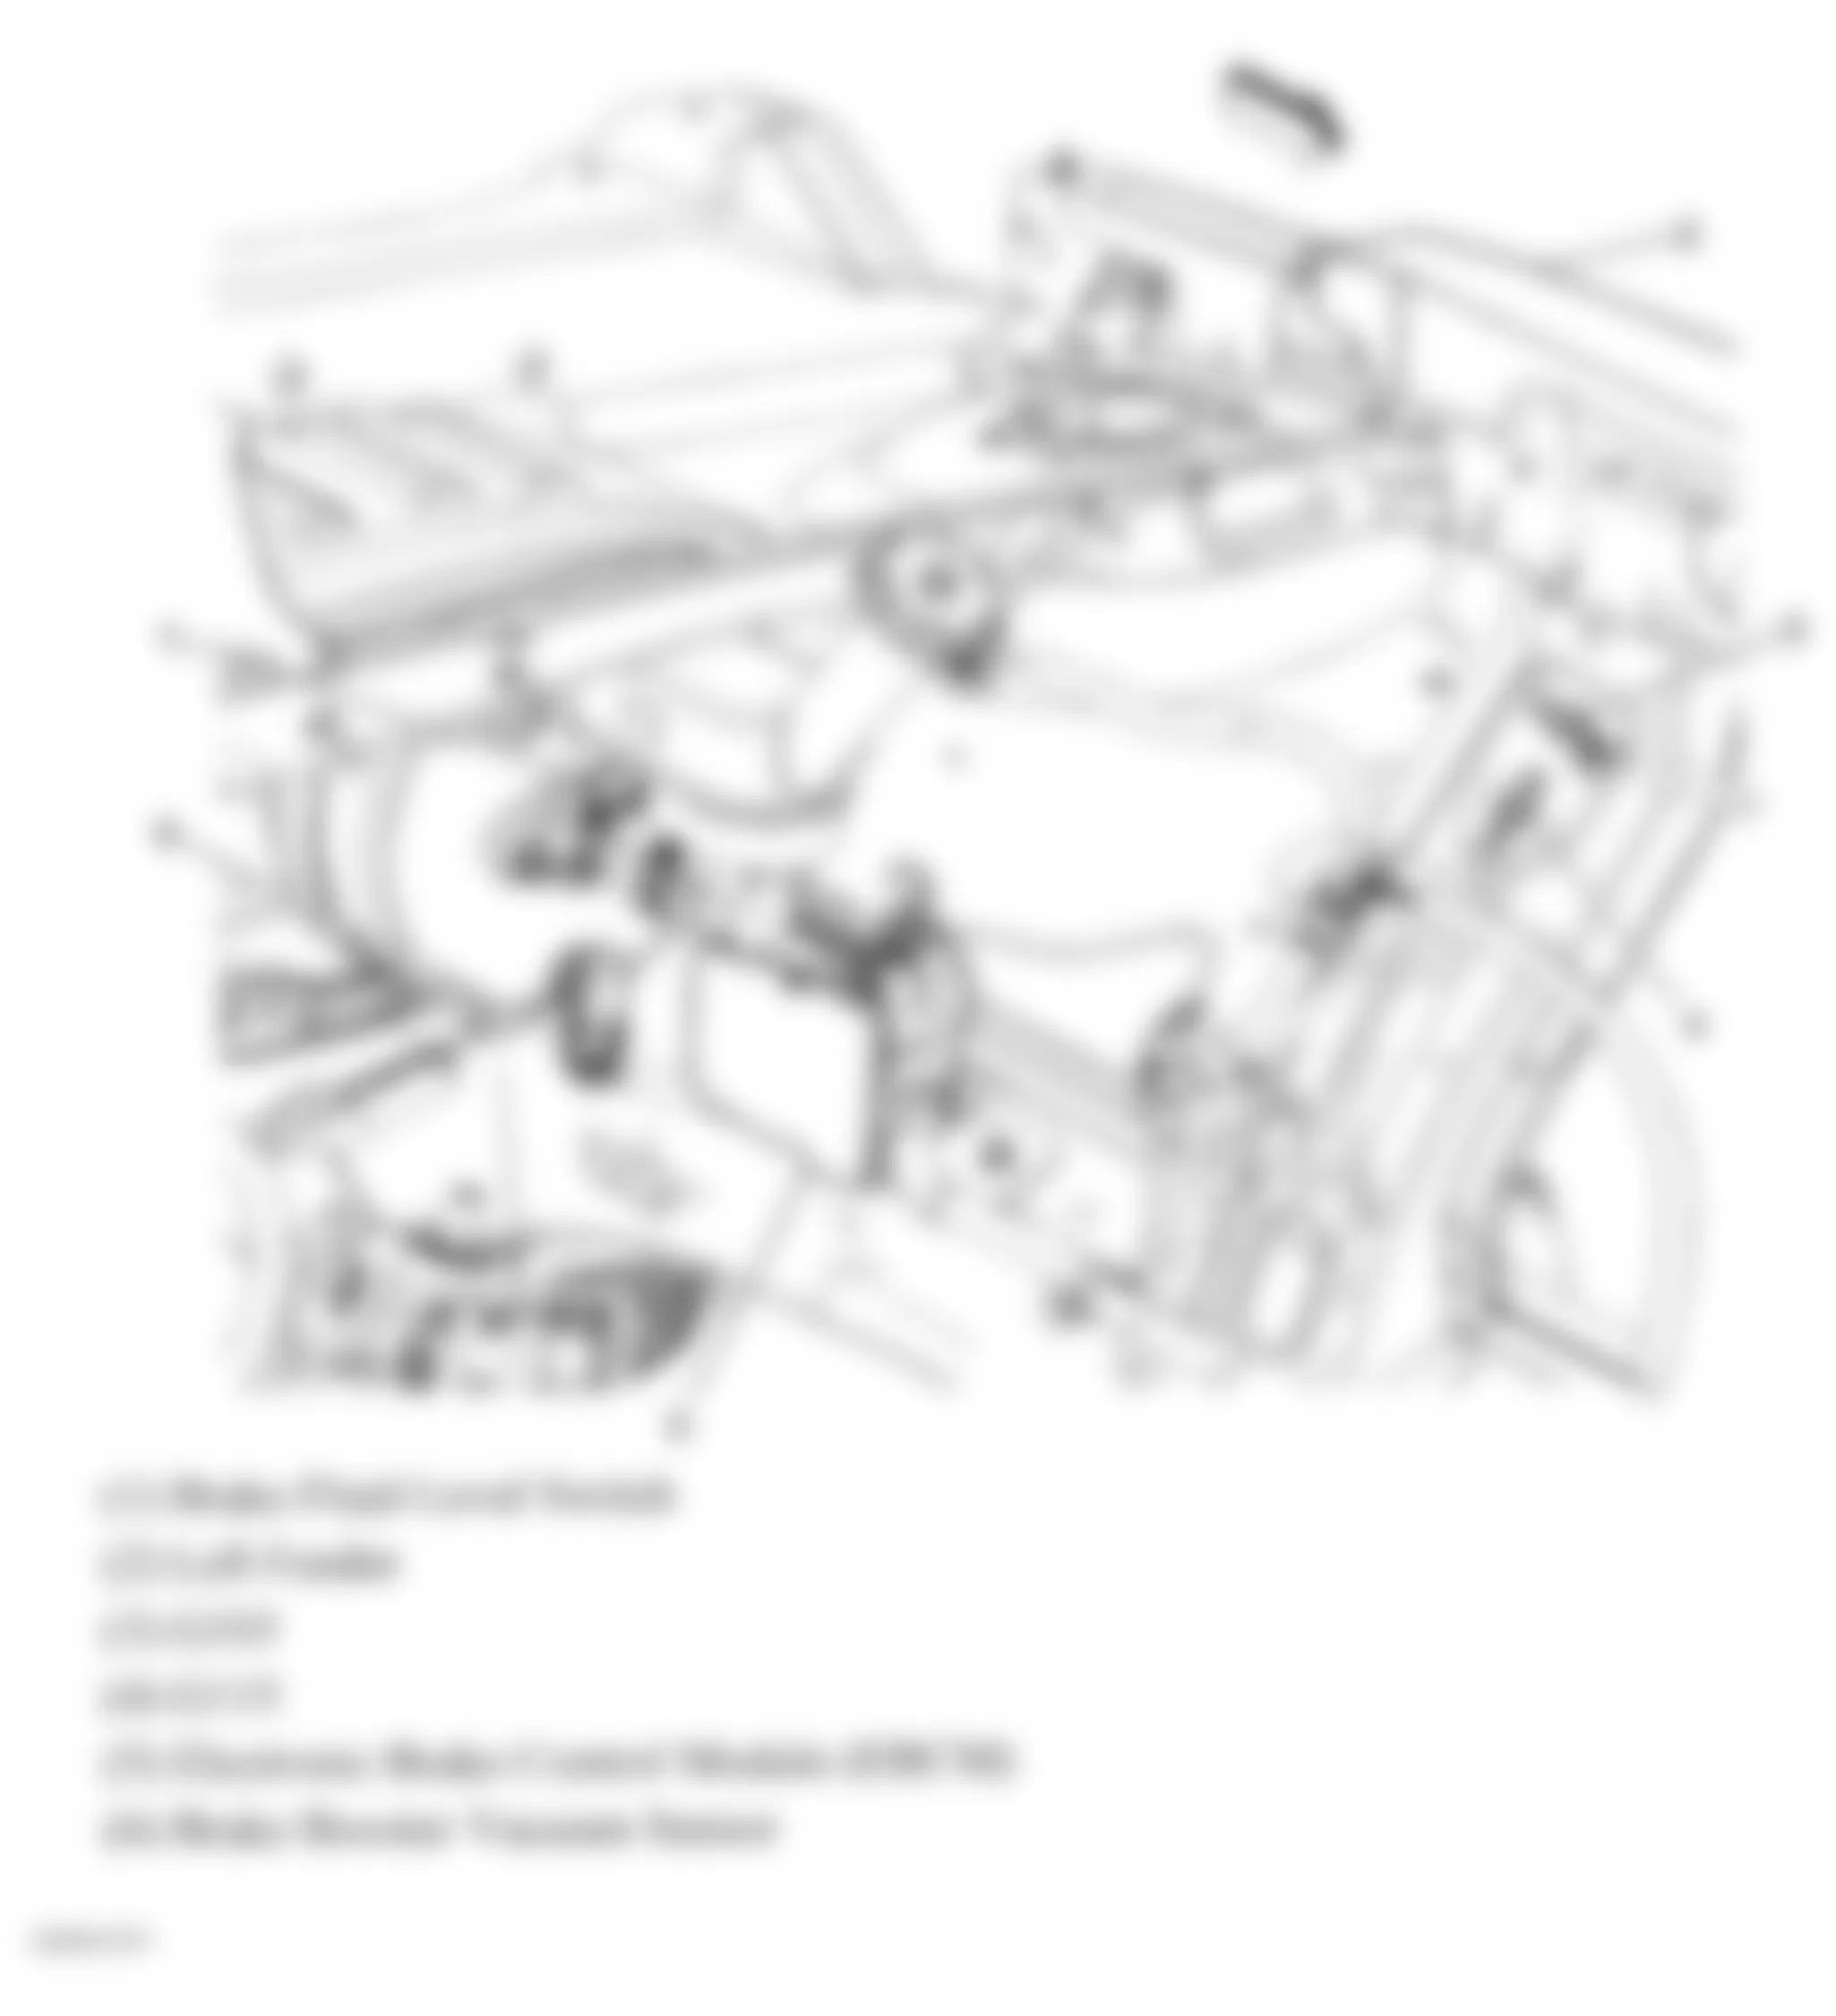 GMC Acadia SLE 2007 - Component Locations -  Left Rear Of Engine Compartment